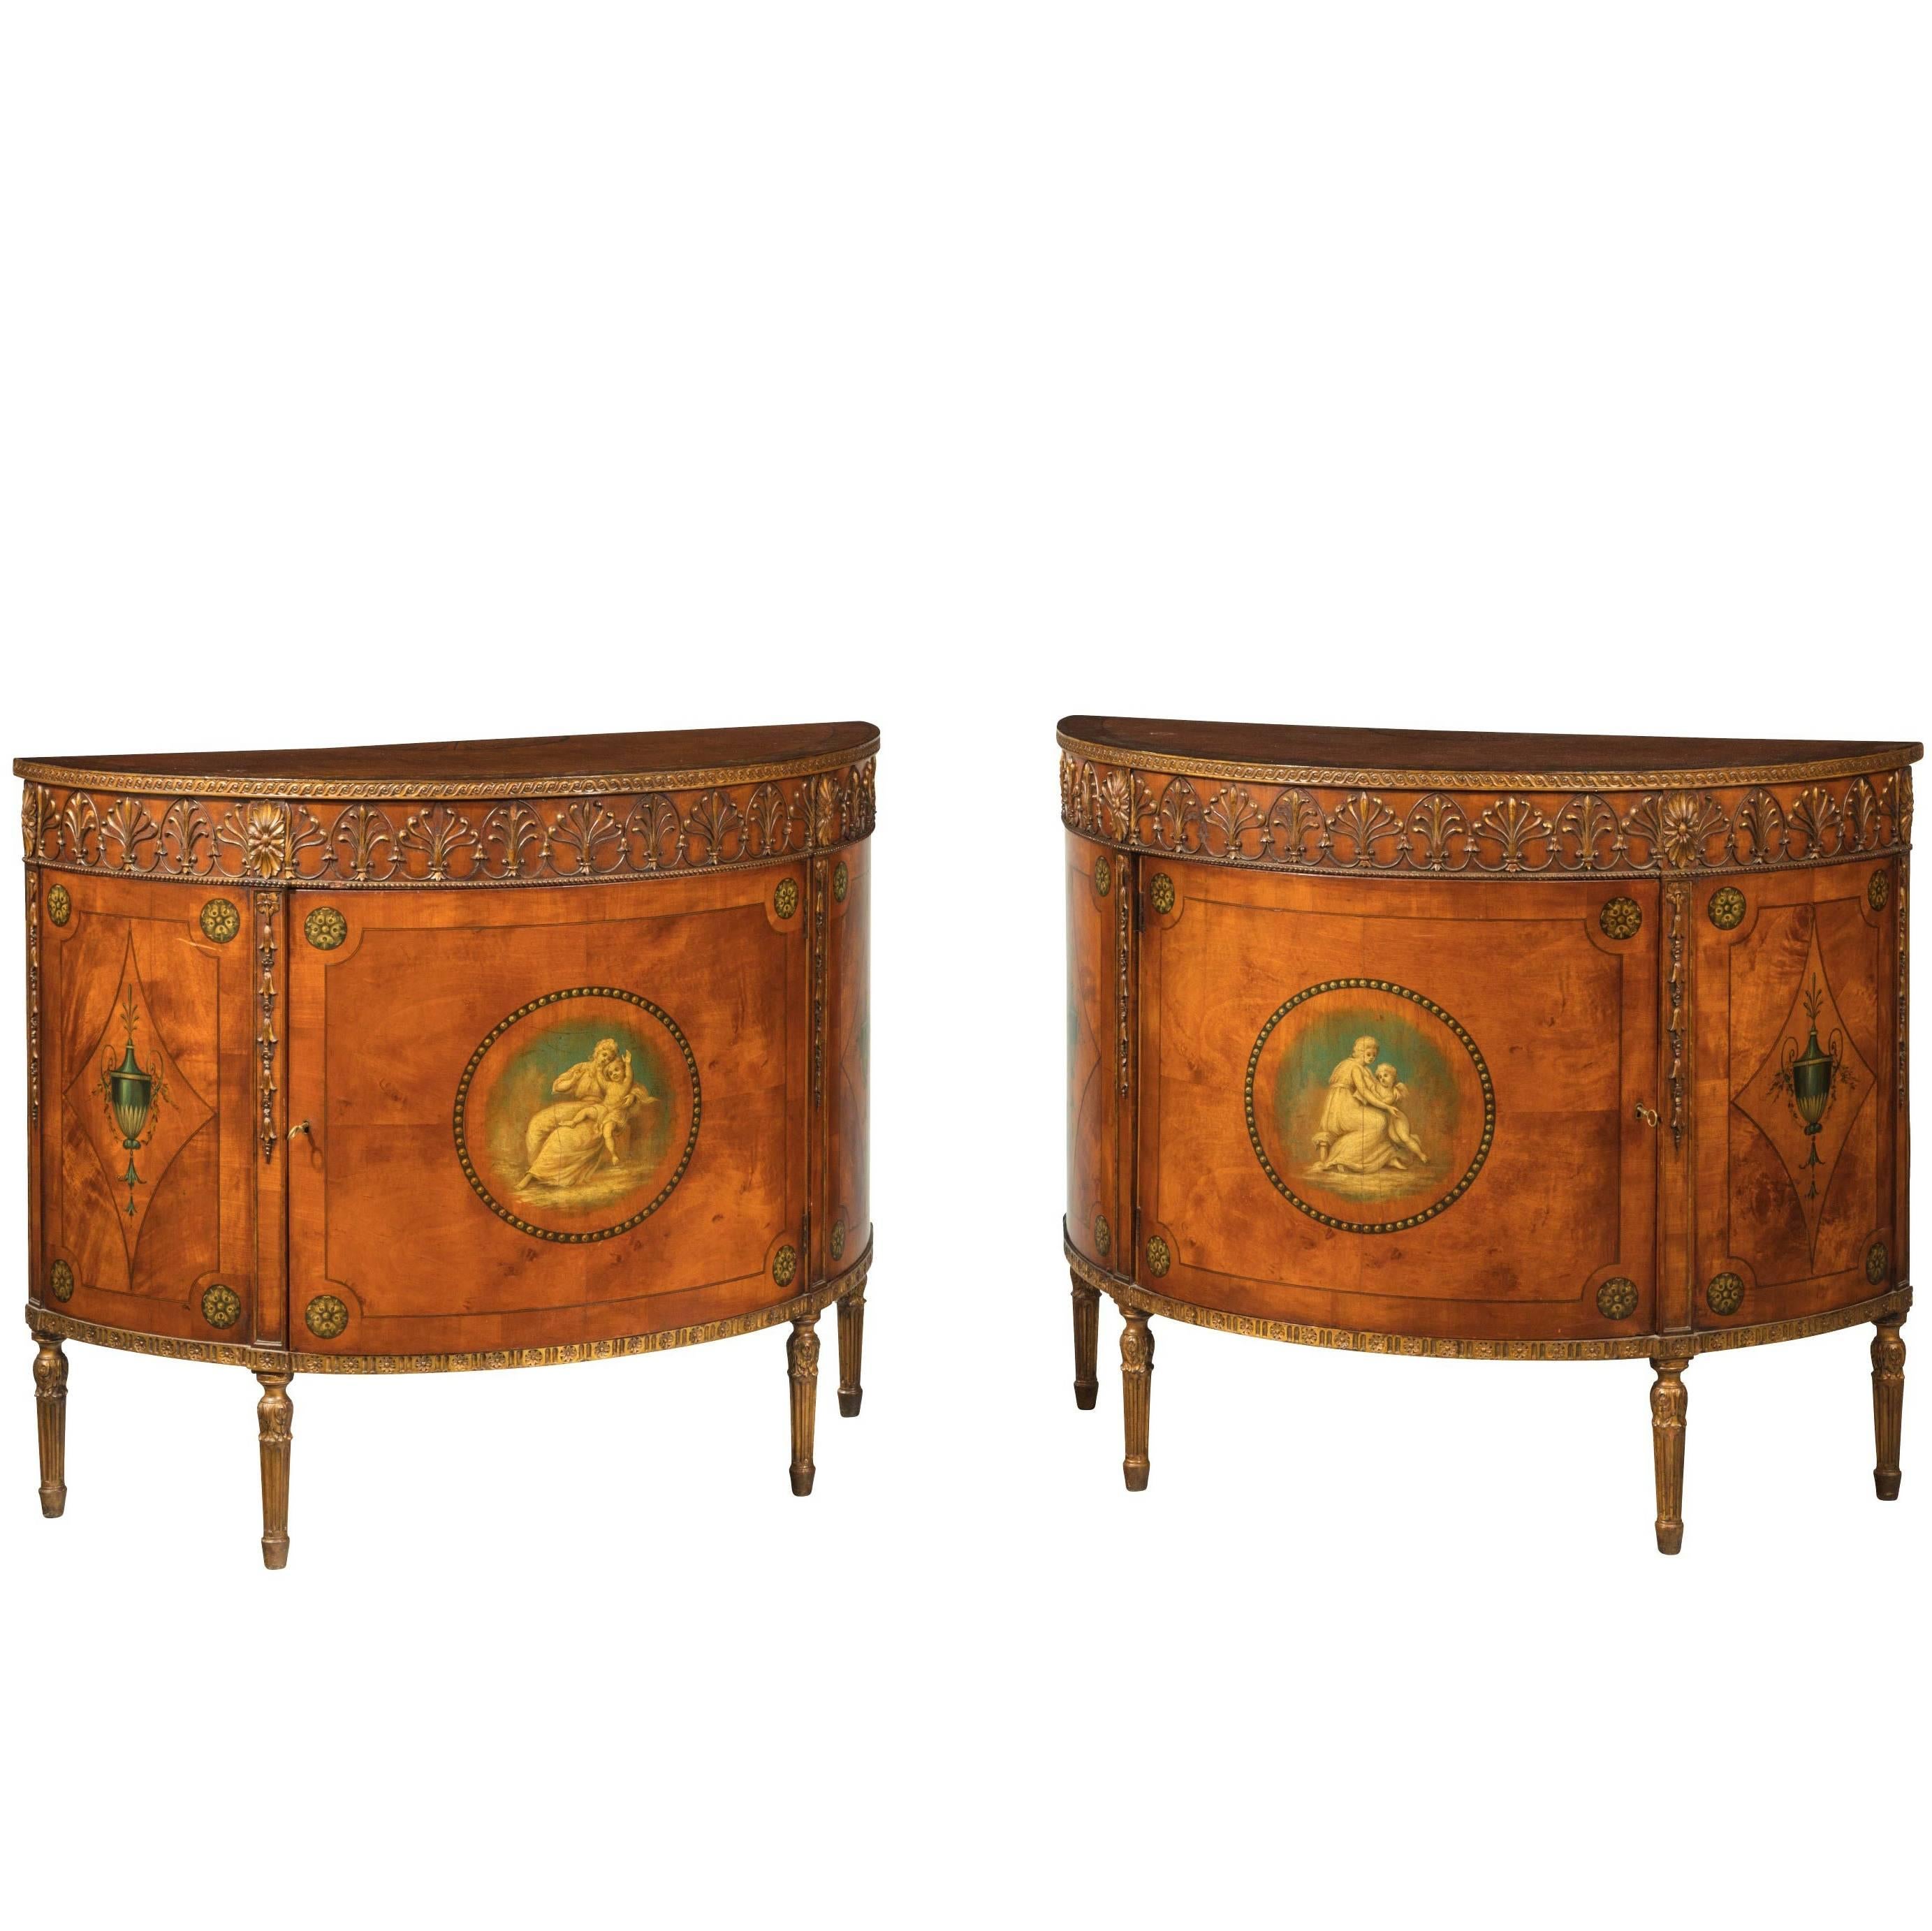 Pair of Sheraton Style Satinwood Demilune Commodes For Sale